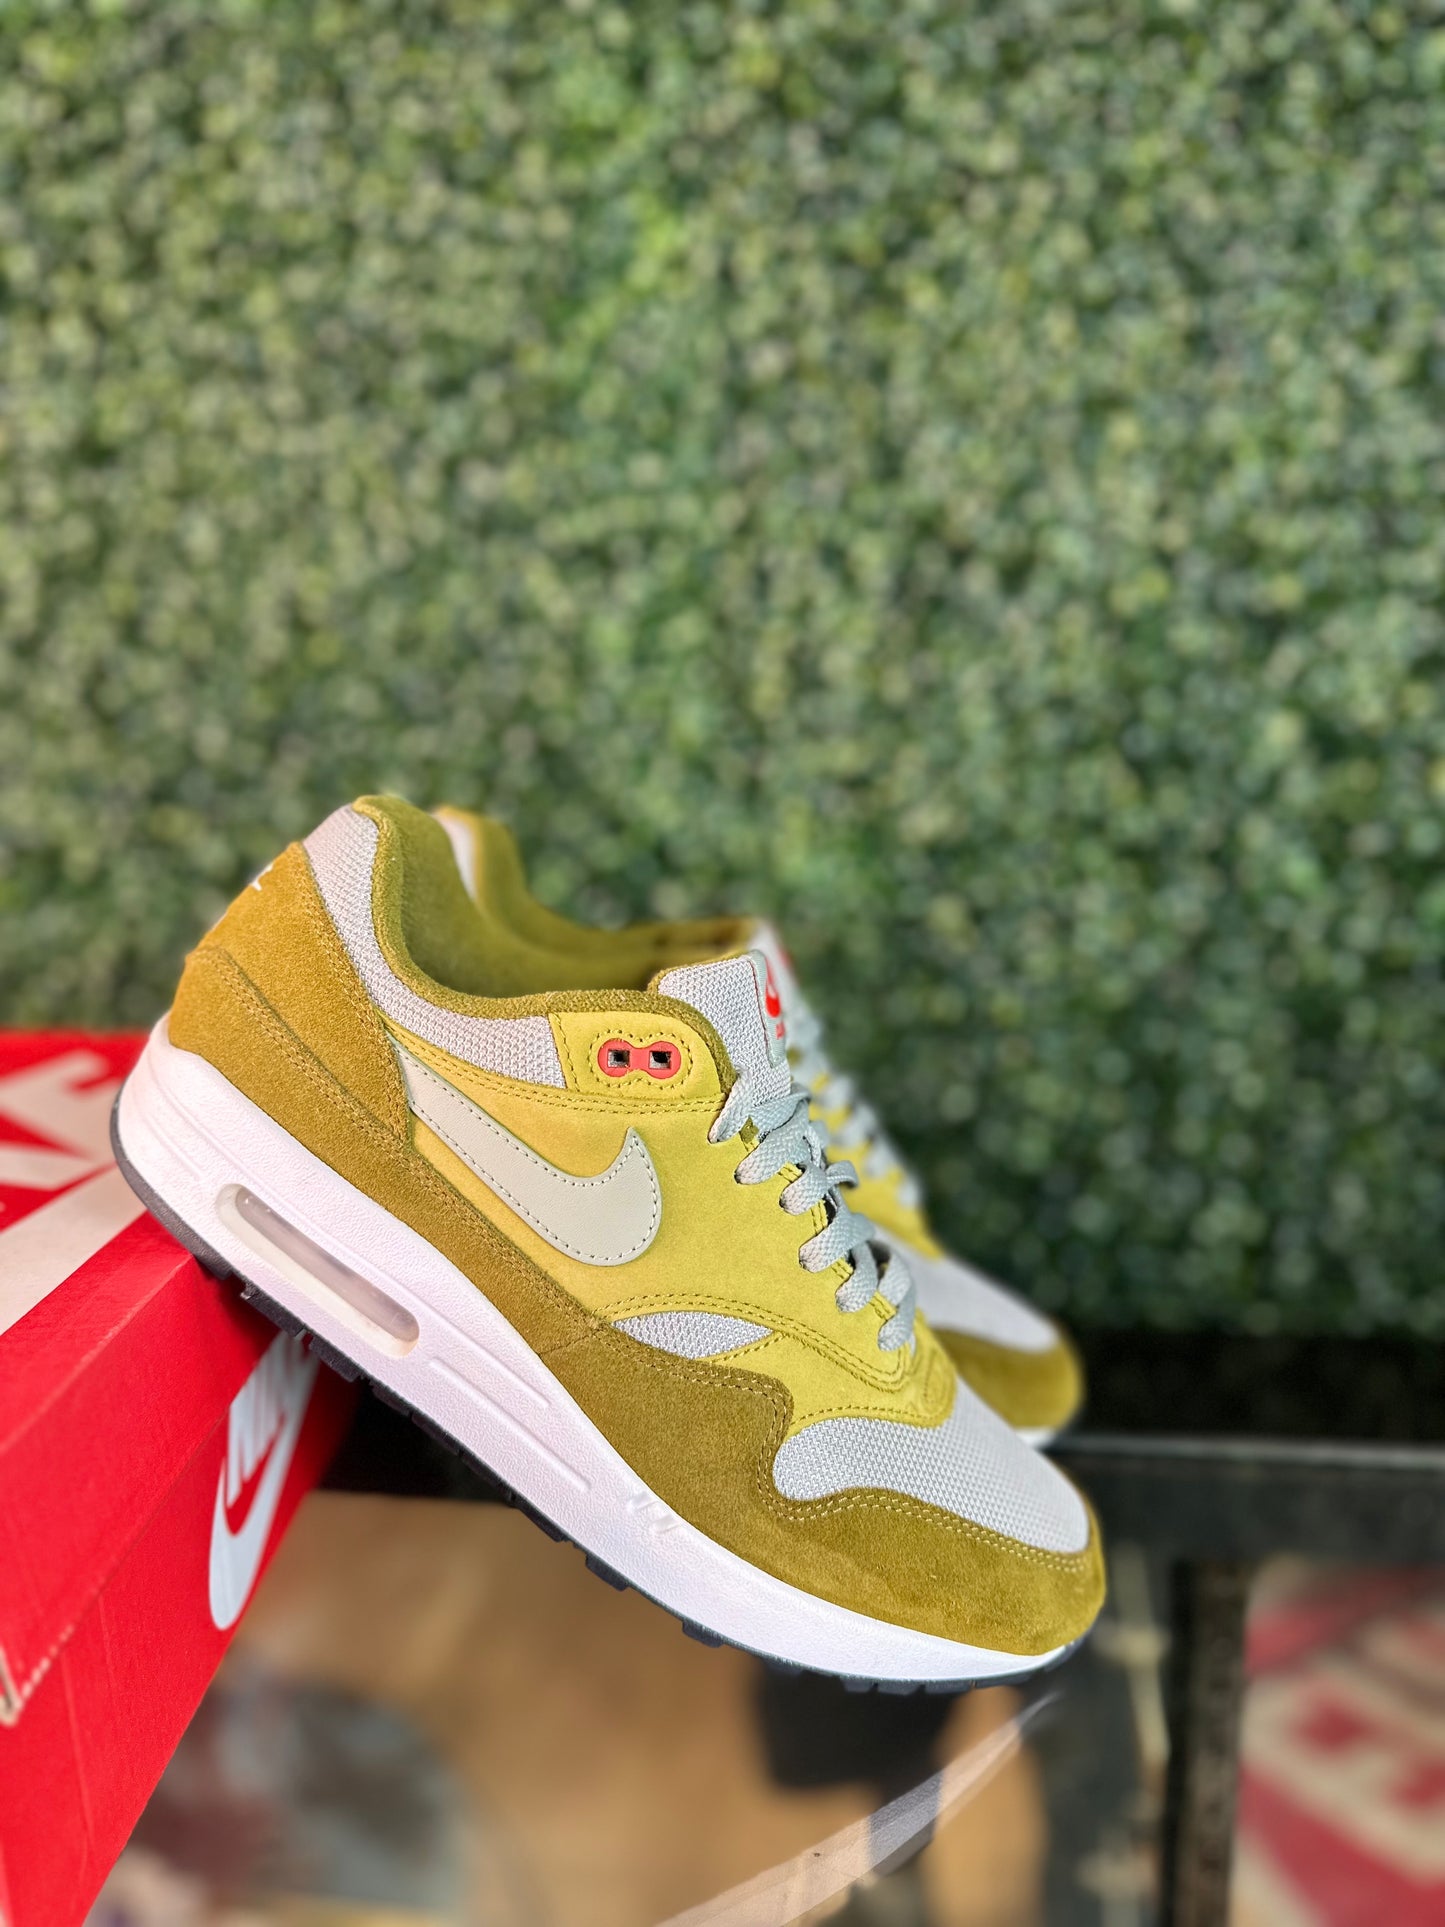 Air Max 1 “Curry Pack Olive” Retro (2018) Size 10 CLEAN OG